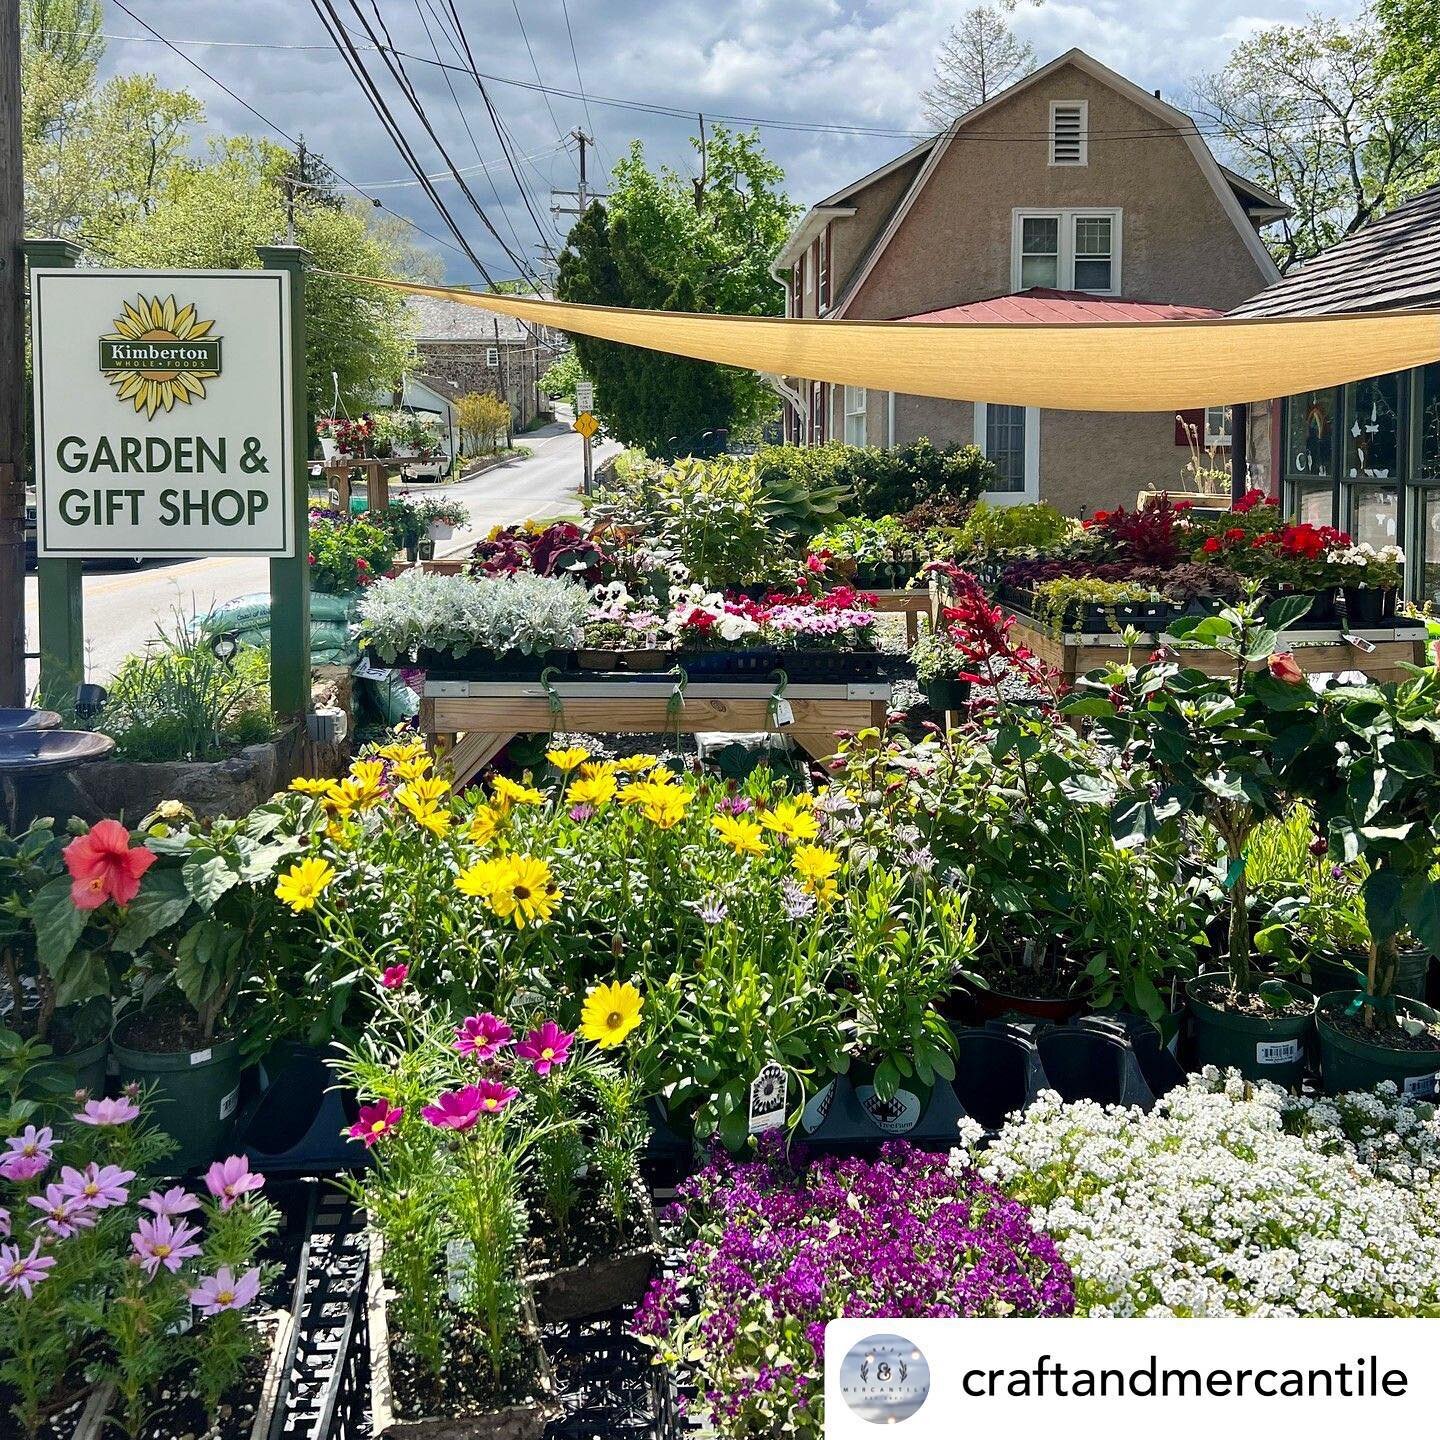 #repost &bull; @craftandmercantile We are so excited to return to Kimberton Village this year on Friday, May 19th for our opening night of Craft &amp; Mercantile at Kimberton Whole Foods Garden &amp; Gift Shop. Our gracious host, @kimbertonwholefoods